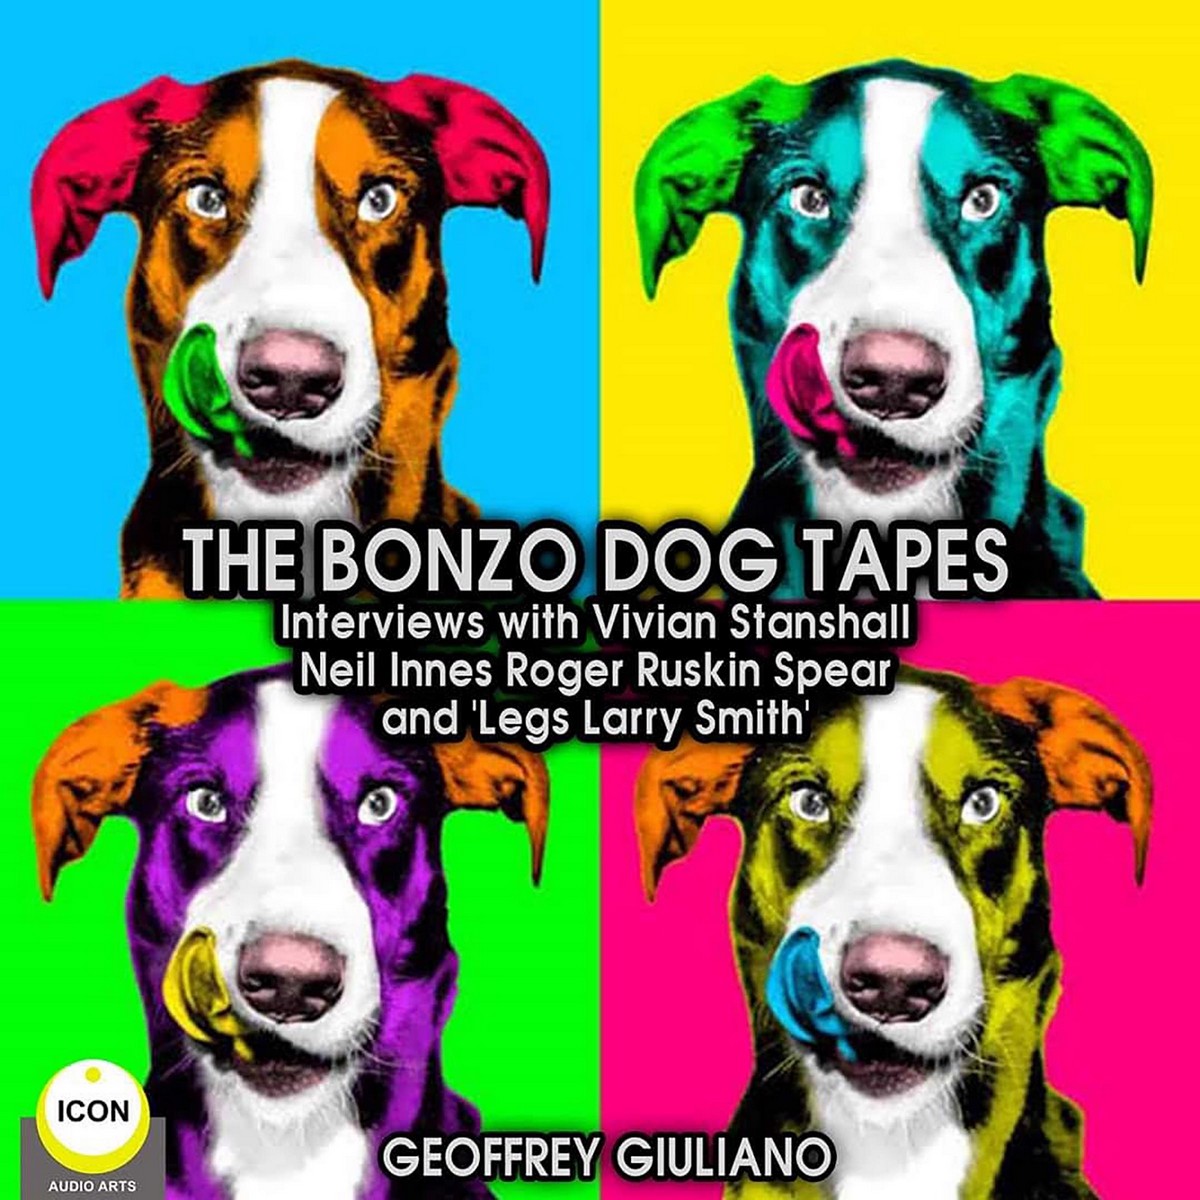 The Bonzo Dog Tapes; Interviews with Vivian Stanshall, Neil Innes, Roger Ruskin Spear and “Legs Larry Smith”